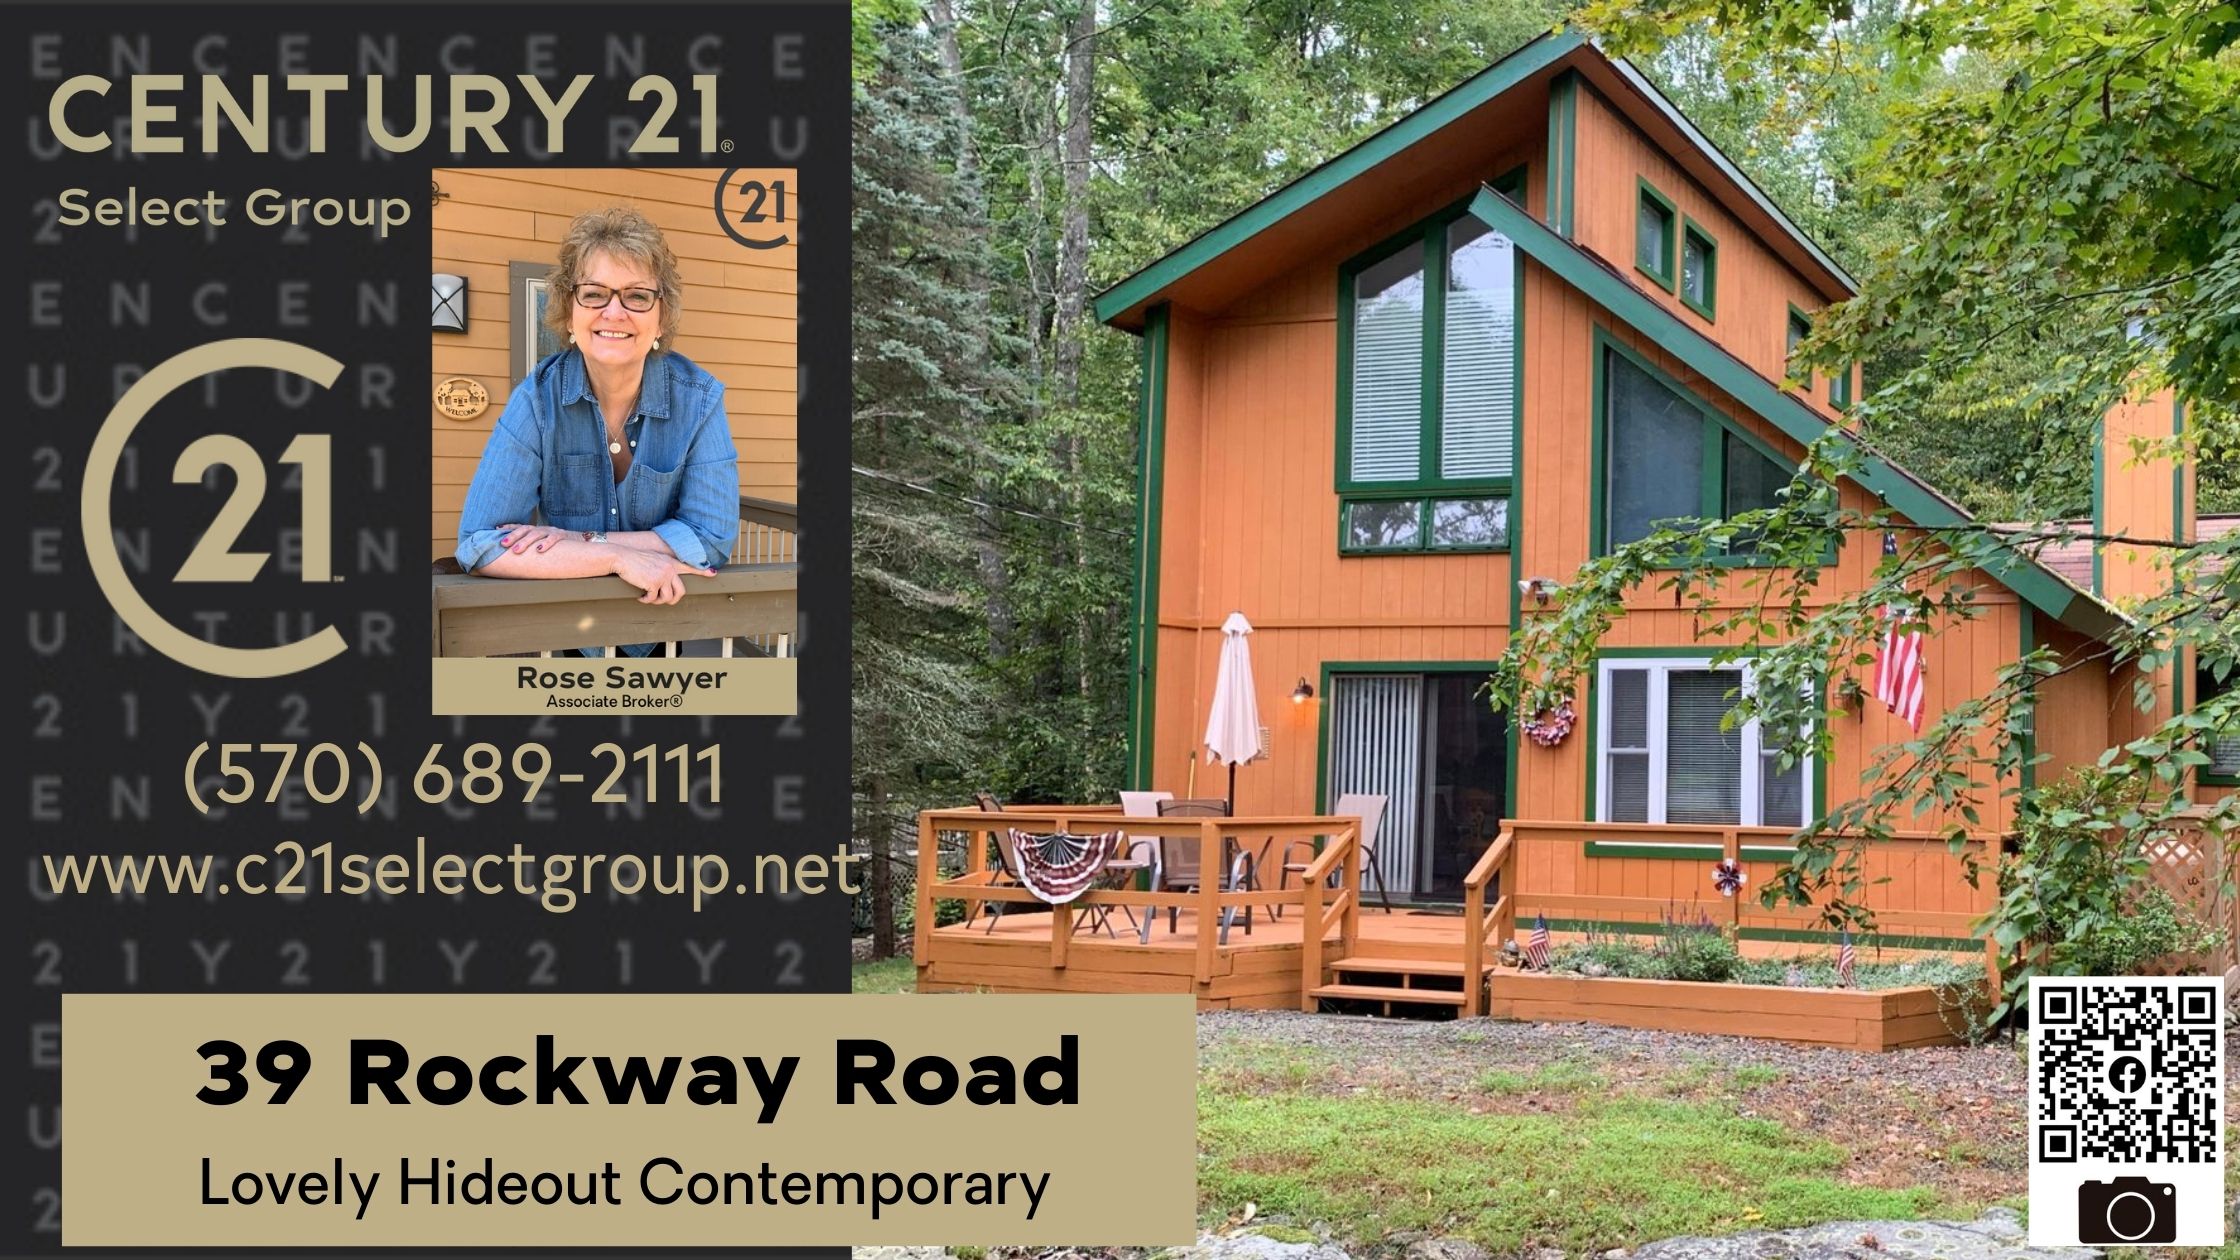 39 Rockway Road: Lovely Hideout Contemporary